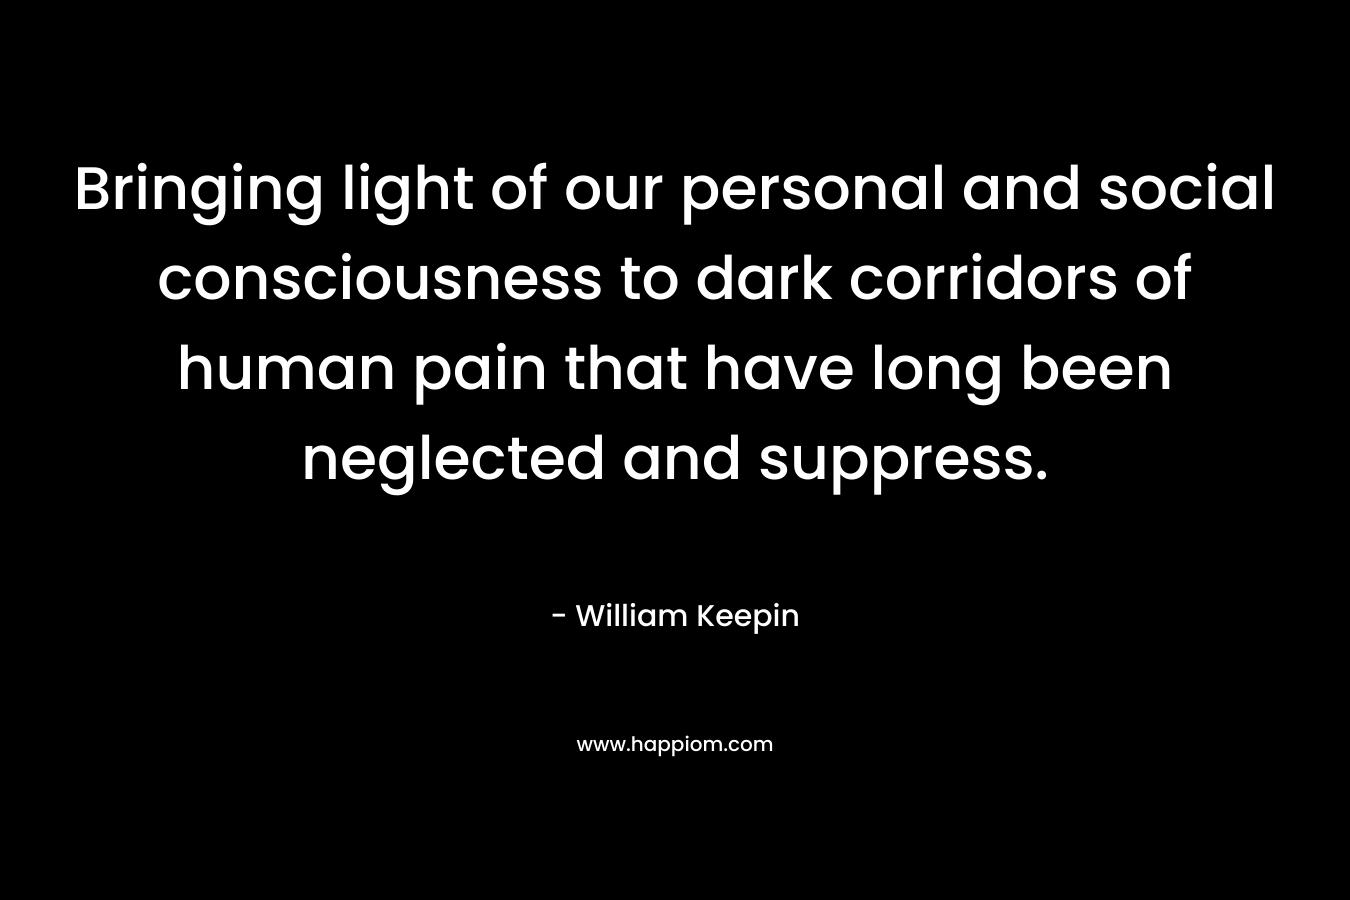 Bringing light of our personal and social consciousness to dark corridors of human pain that have long been neglected and suppress.